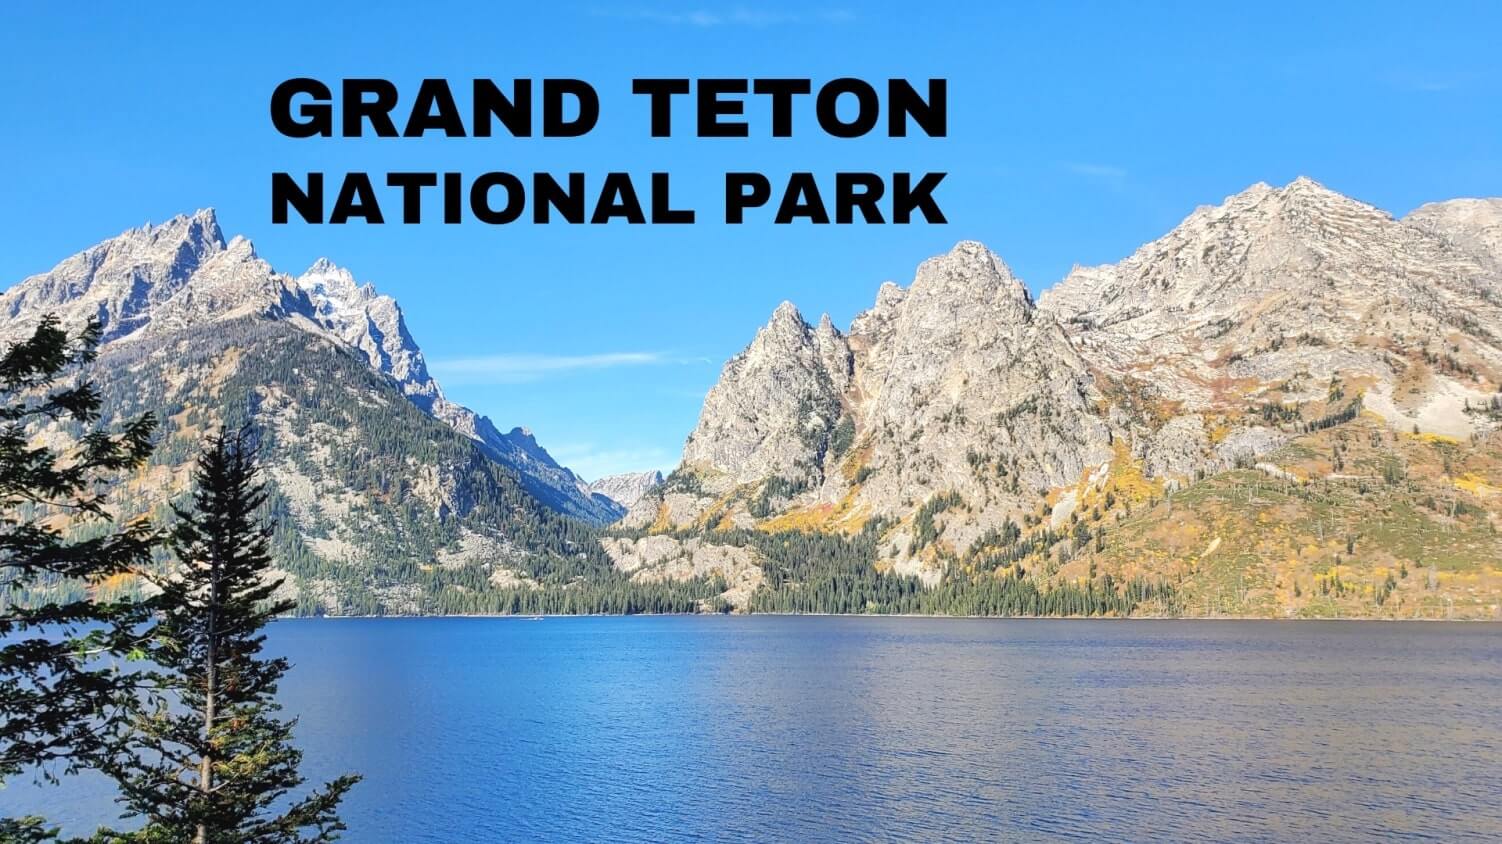 WYOMING OUTDOOR TRAVEL BLOG: Independent traveler's guide to wyoming grand teton national park